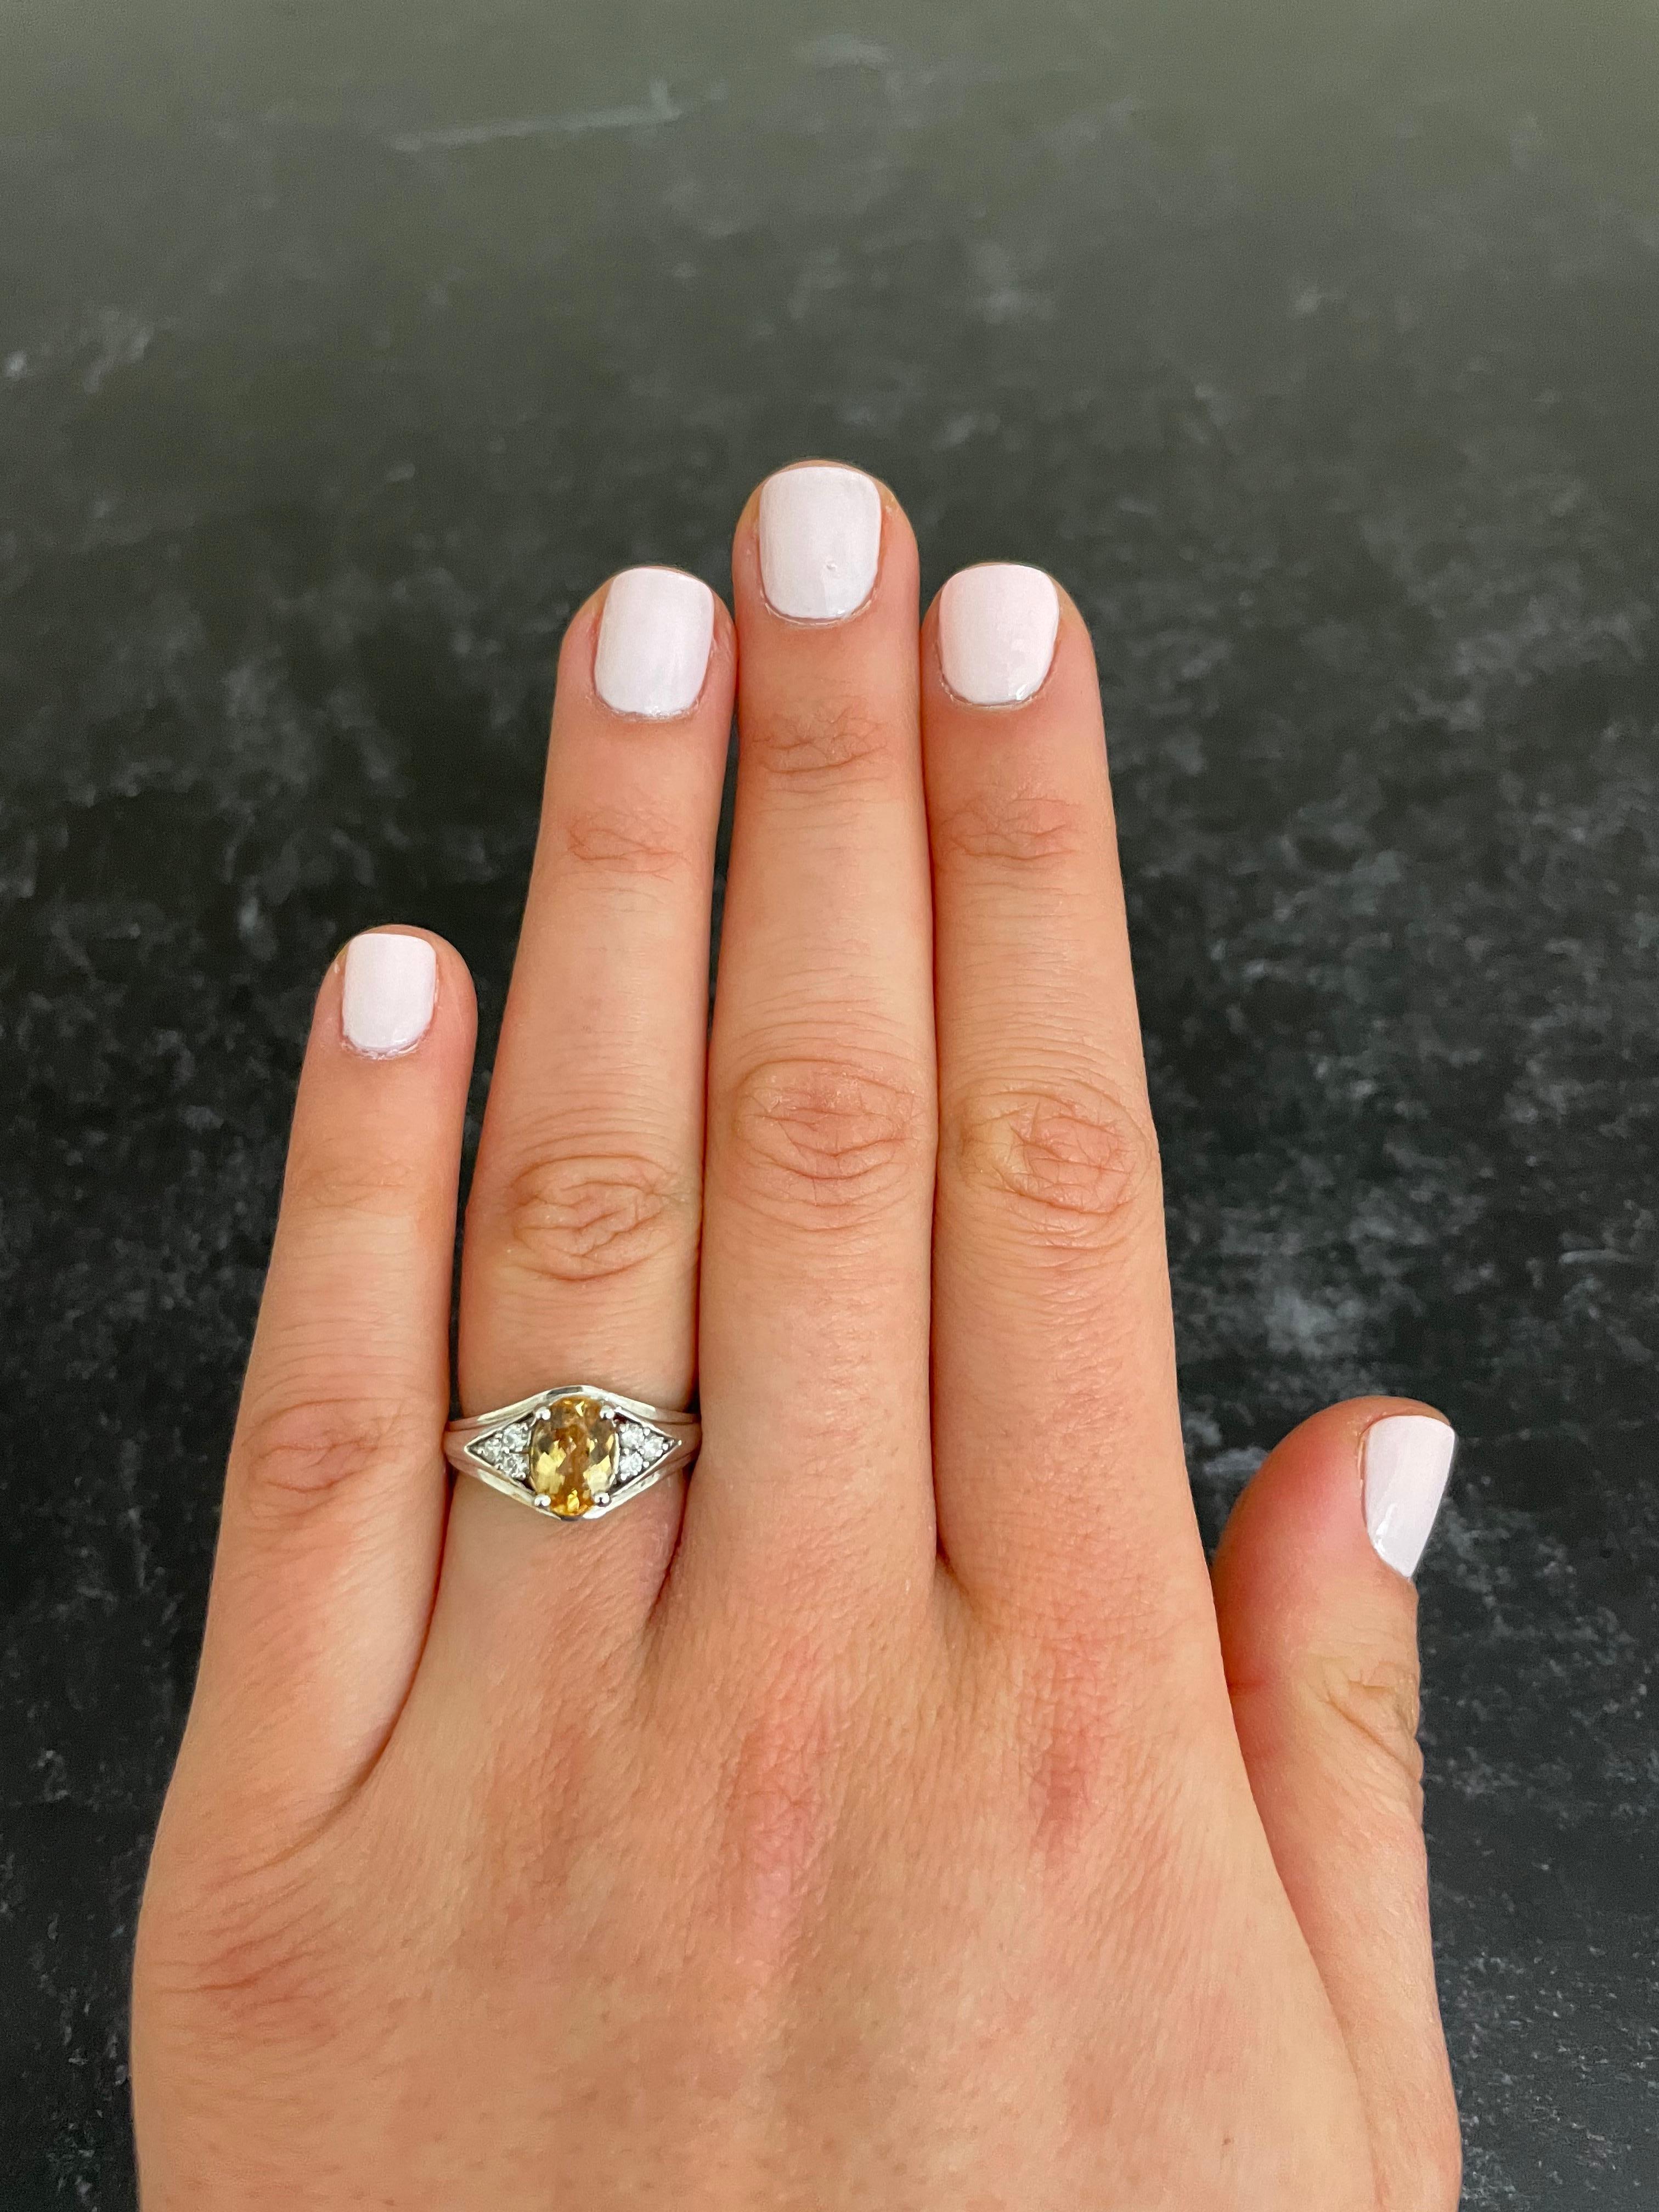 Metal: 14K White Gold
Center Stone: 1 Oval Imperial Topaz at 1.30 Carats - Measuring 8 x 6 millimeters
Side Stones: 6 Round Brilliant White Diamond 0.13 Carats Total Weight

Alberto offers complimentary ring sizing on all rings!

Fine one-of-a-kind